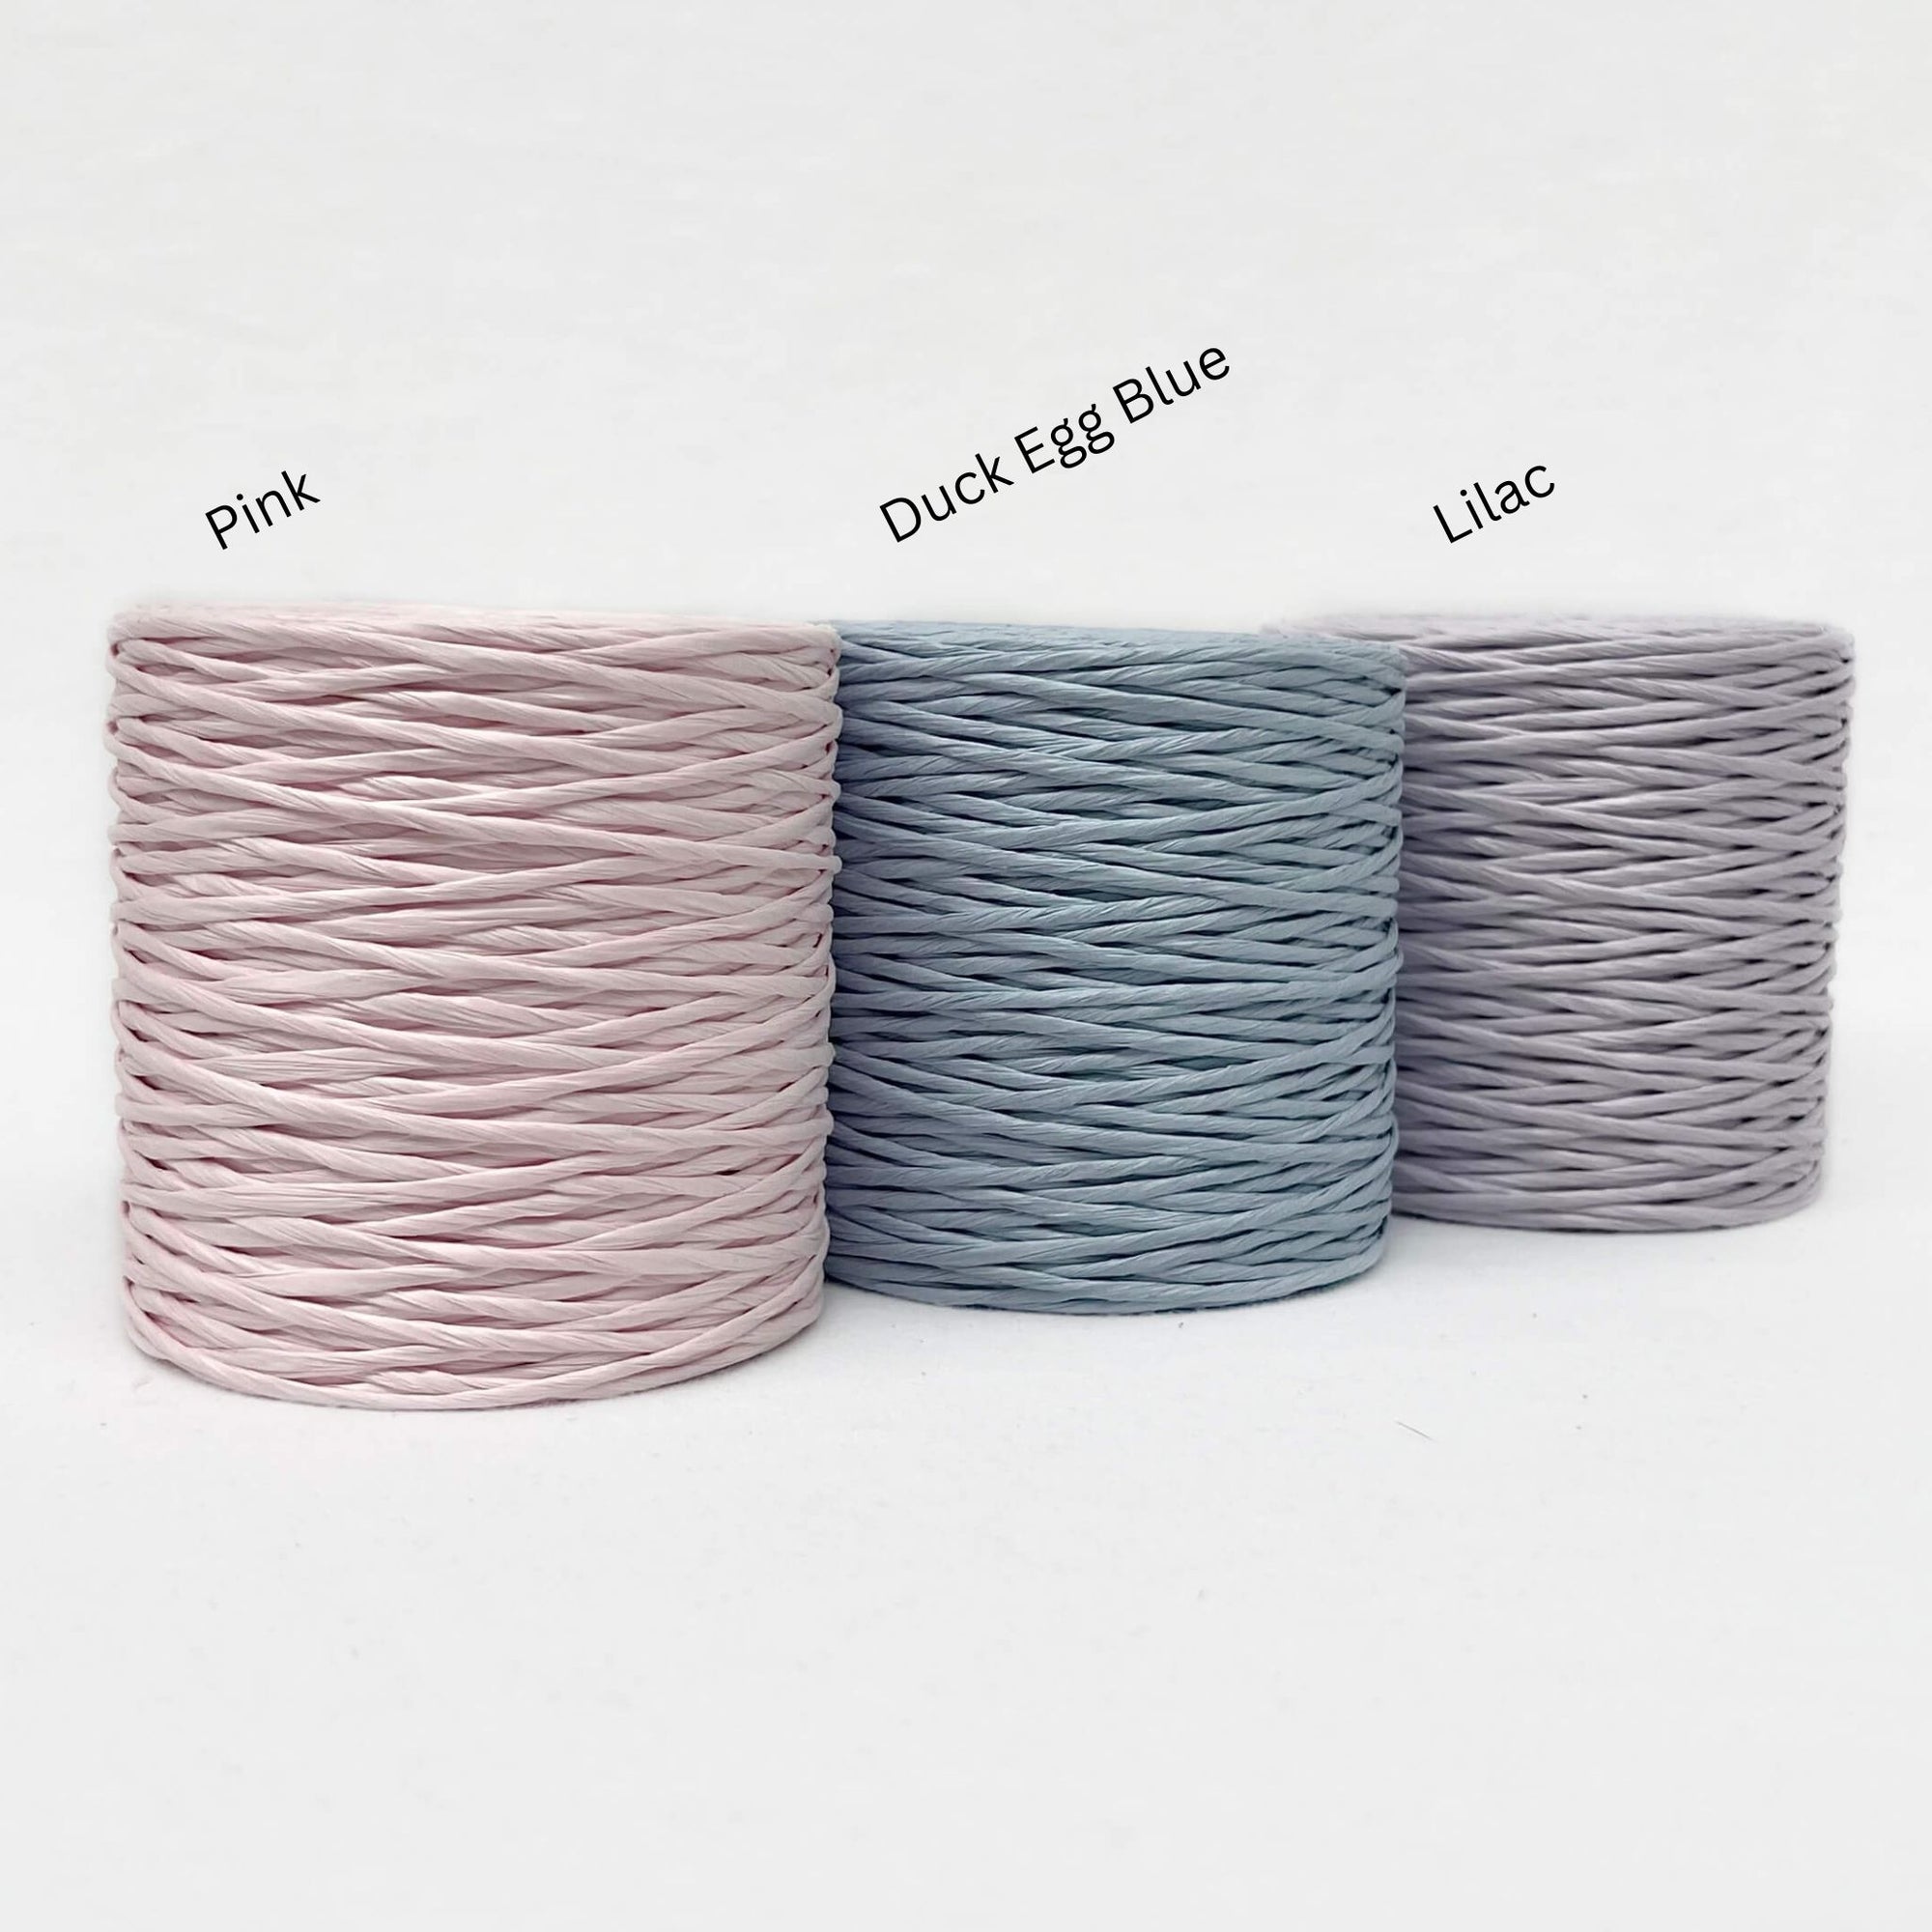 paper wire cord in light colours in combination photos on white background